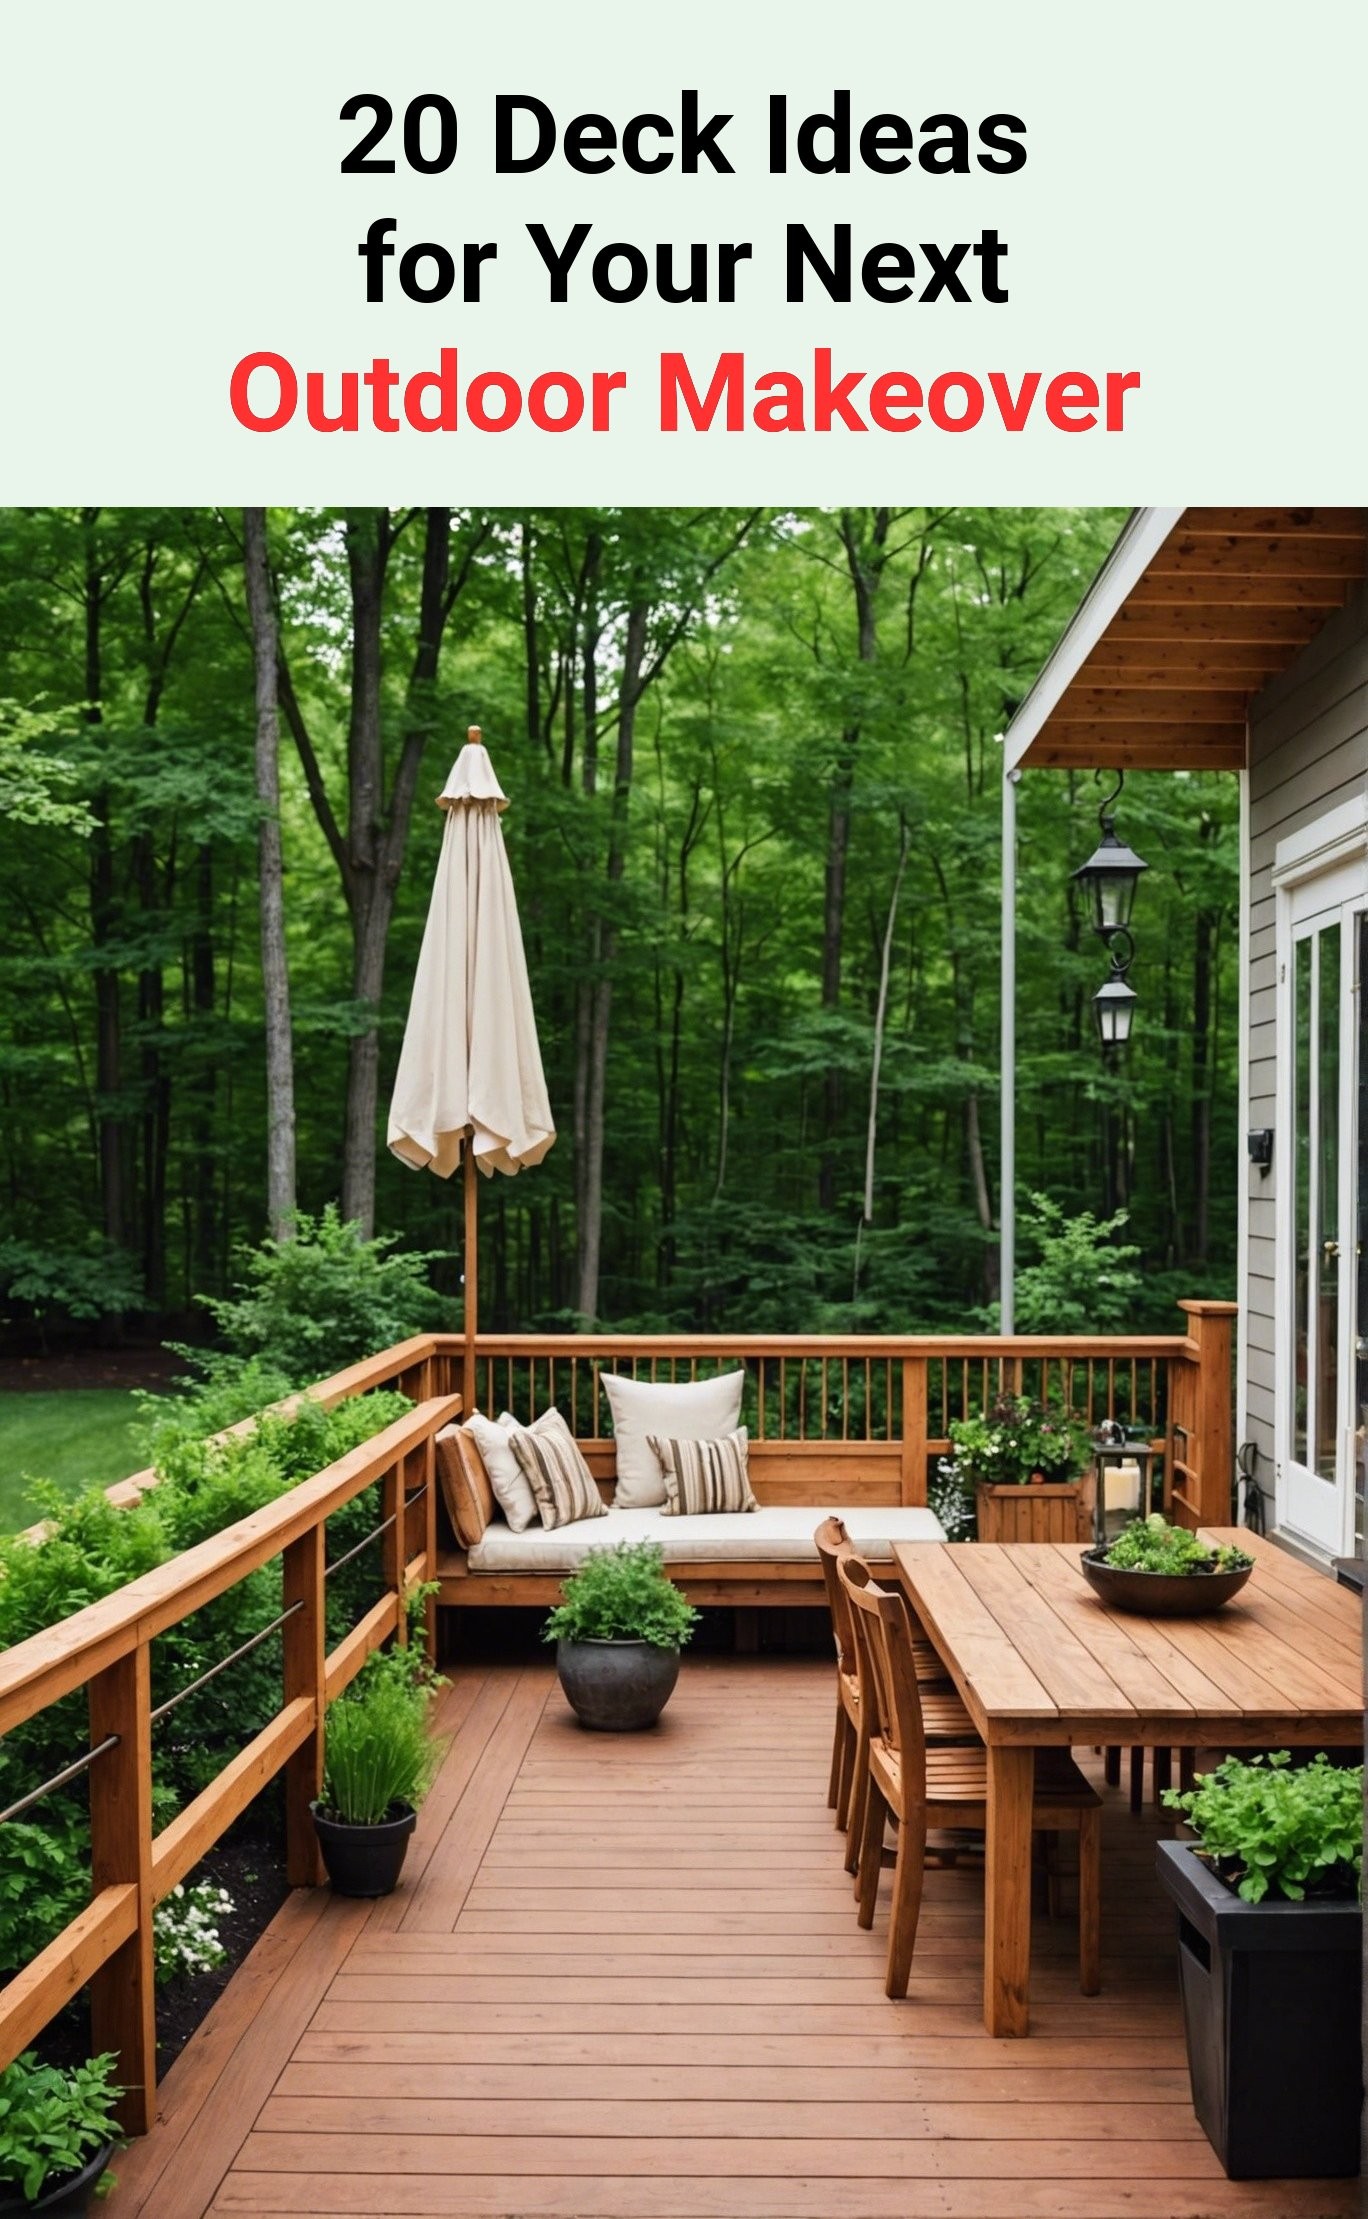 20 Deck Ideas for Your Next Outdoor Makeover